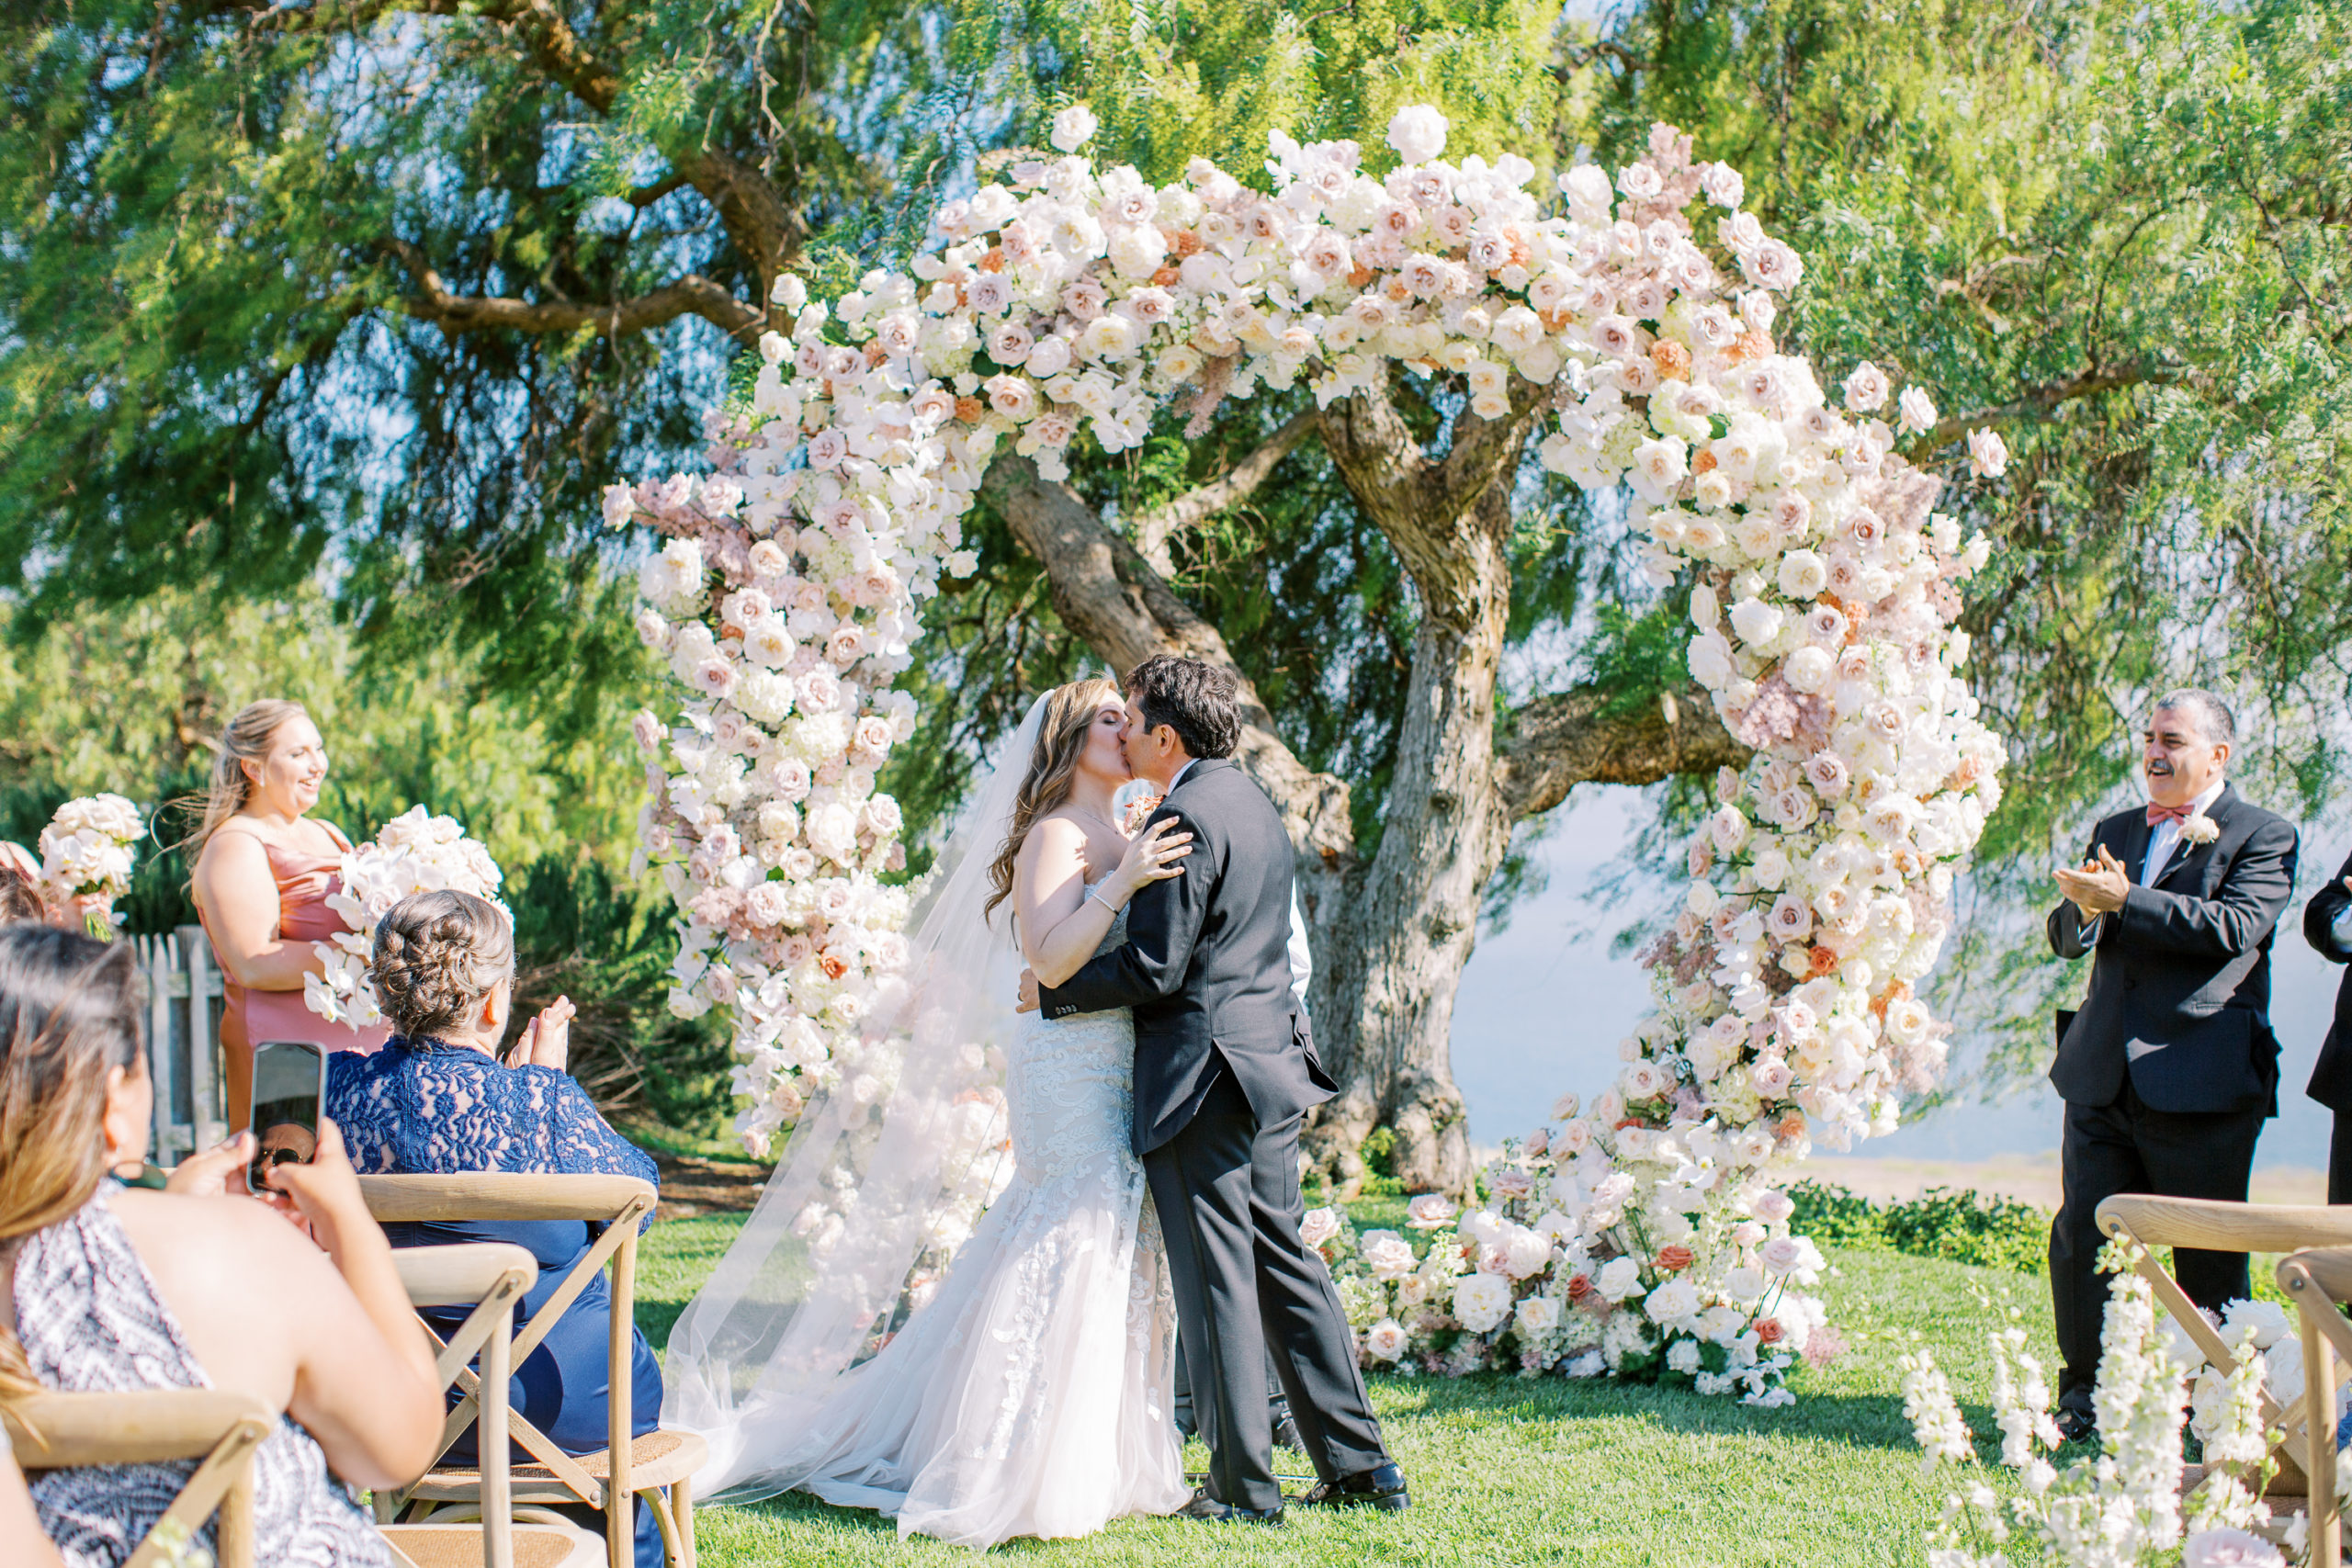 Catalina View Gardens Wedding by mirelle carmichael - the bride and groom share their first kiss as husband and wife